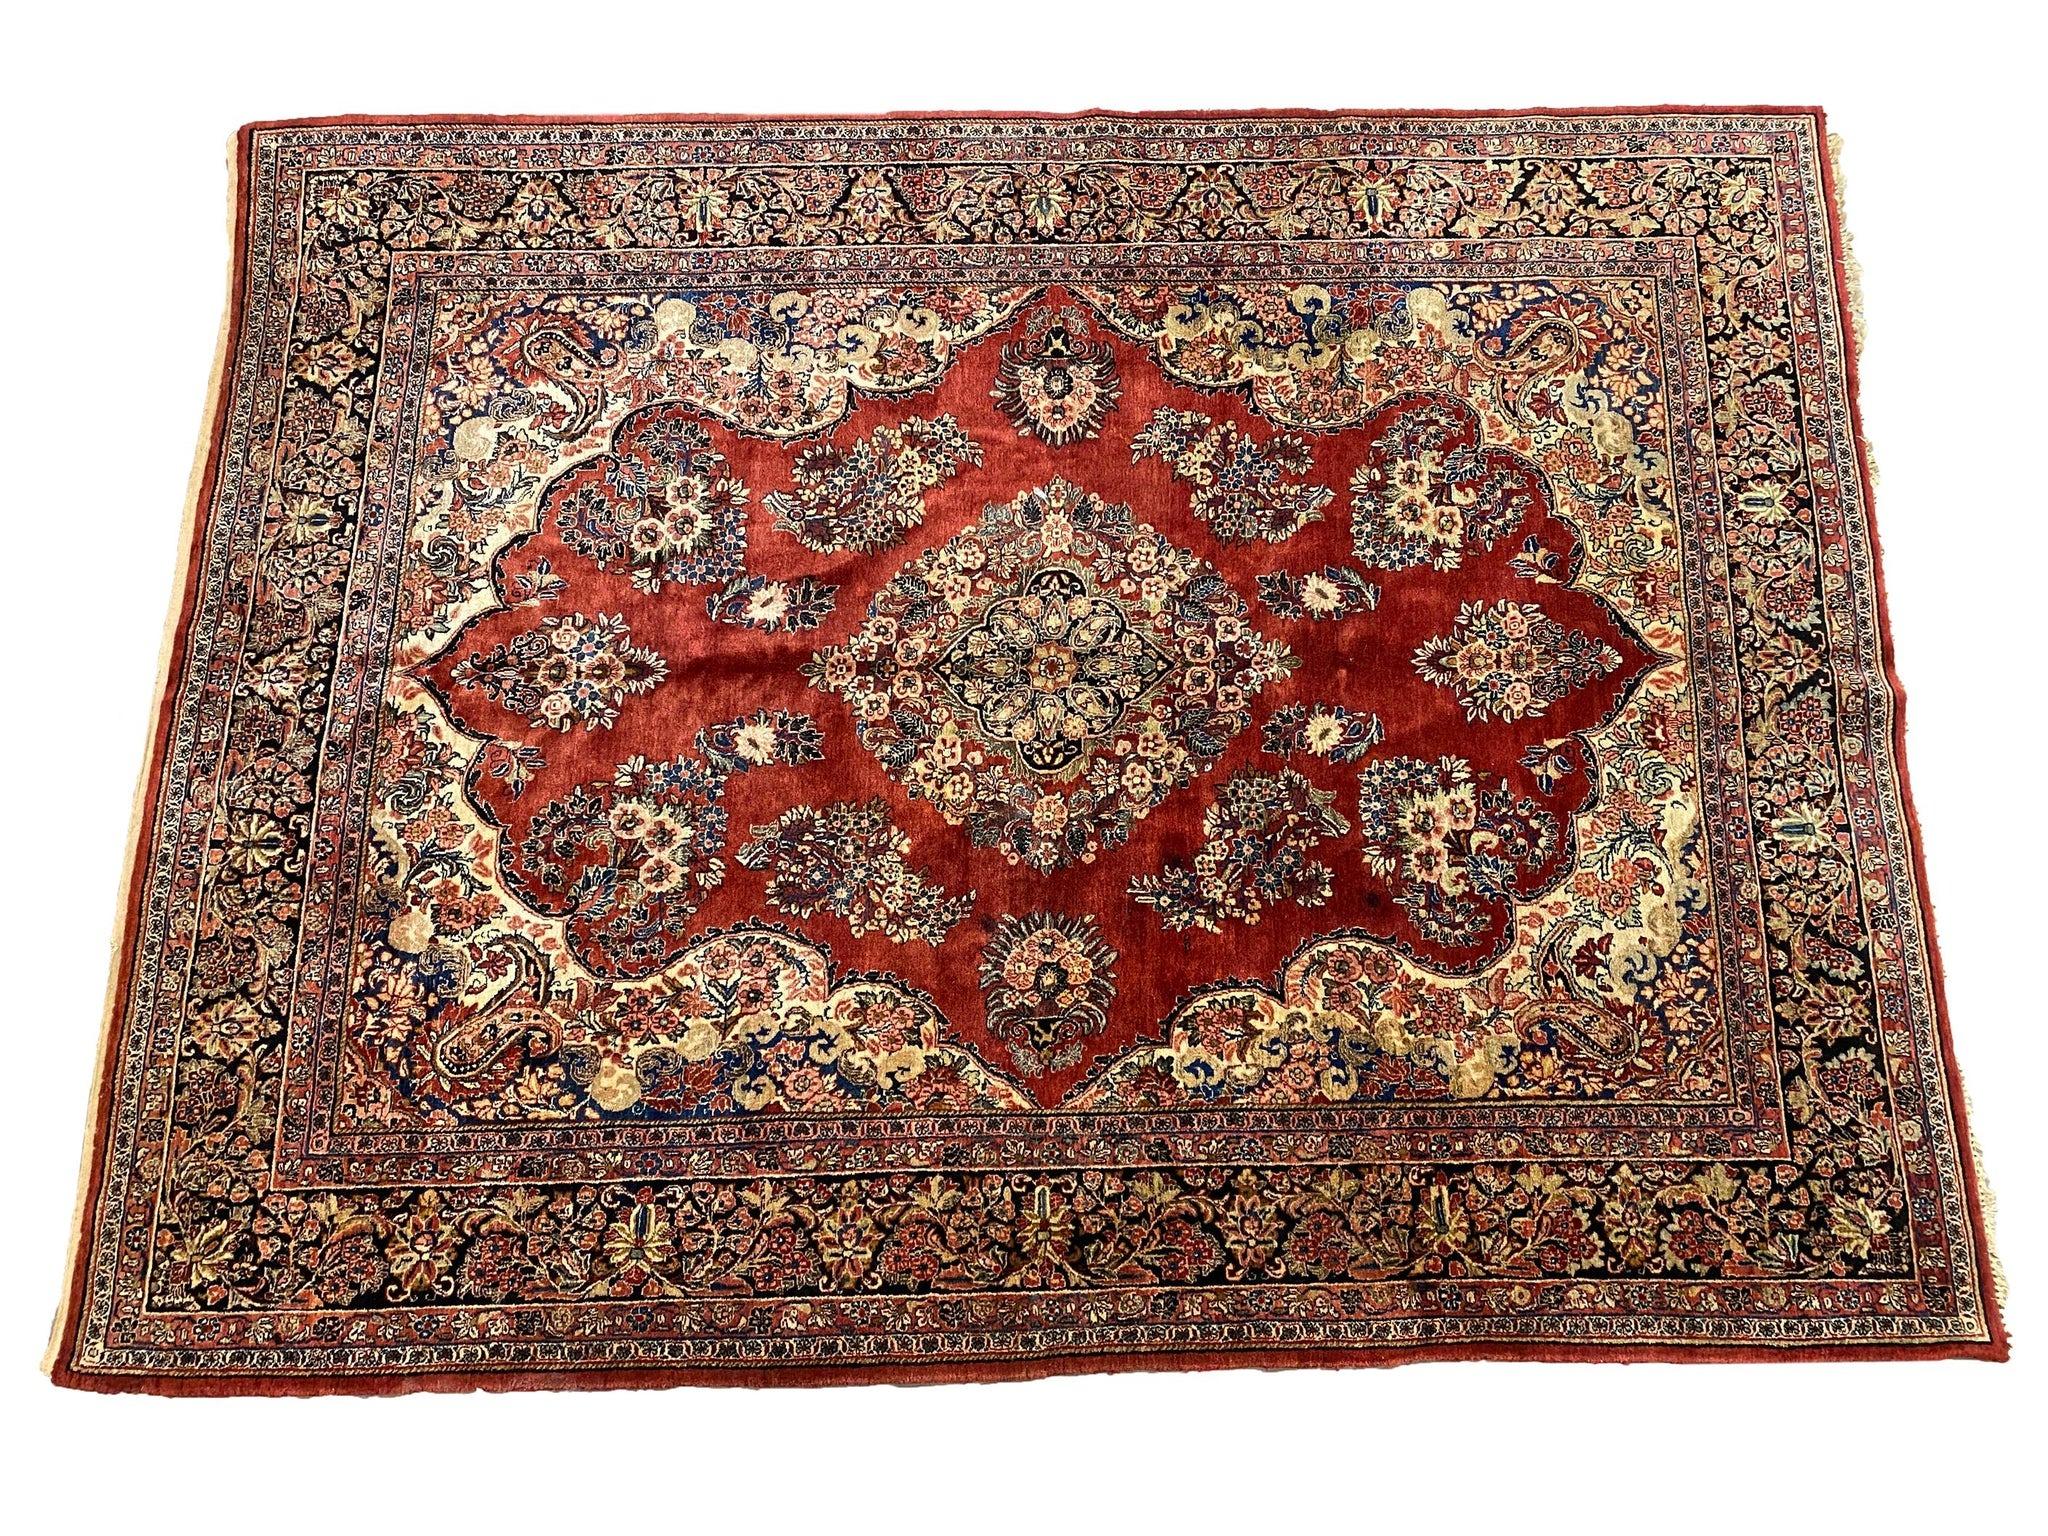  Vintage Persian Sarouk Rug - 12' x 9' In Good Condition For Sale In Newmanstown, PA